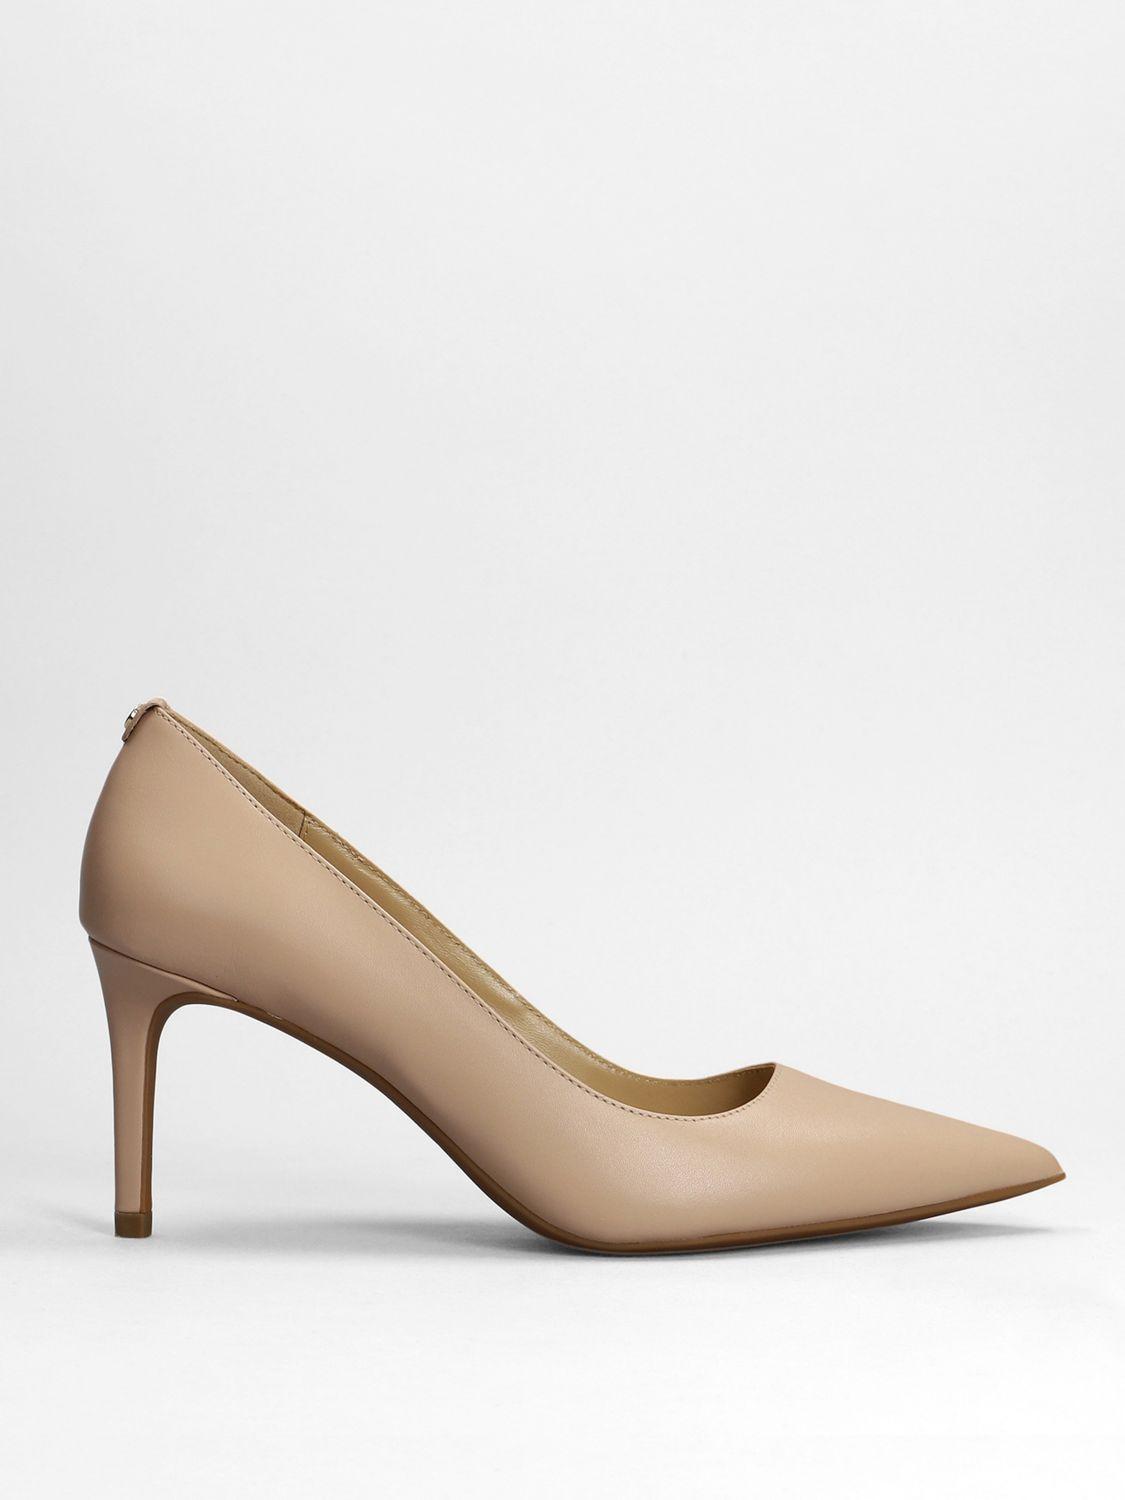 Michael Kors Court Shoes in Natural | Lyst Canada